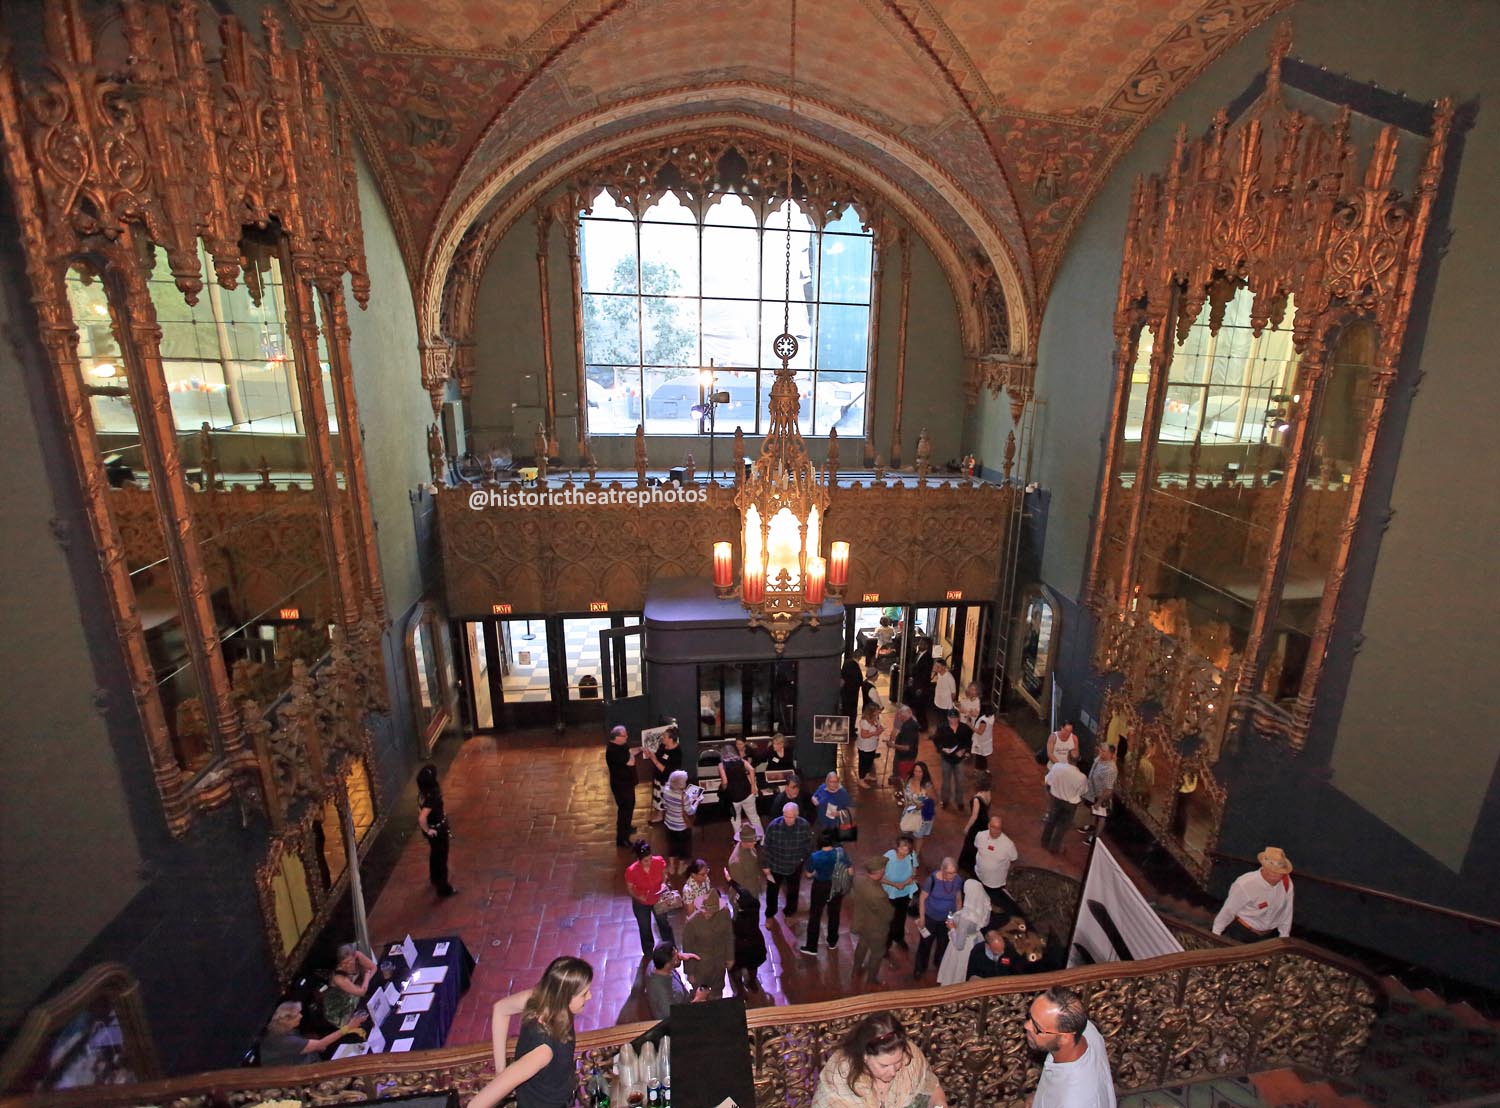 The United Theater on Broadway, Los Angeles: Entrance Lobby from Mezzanine level night-time